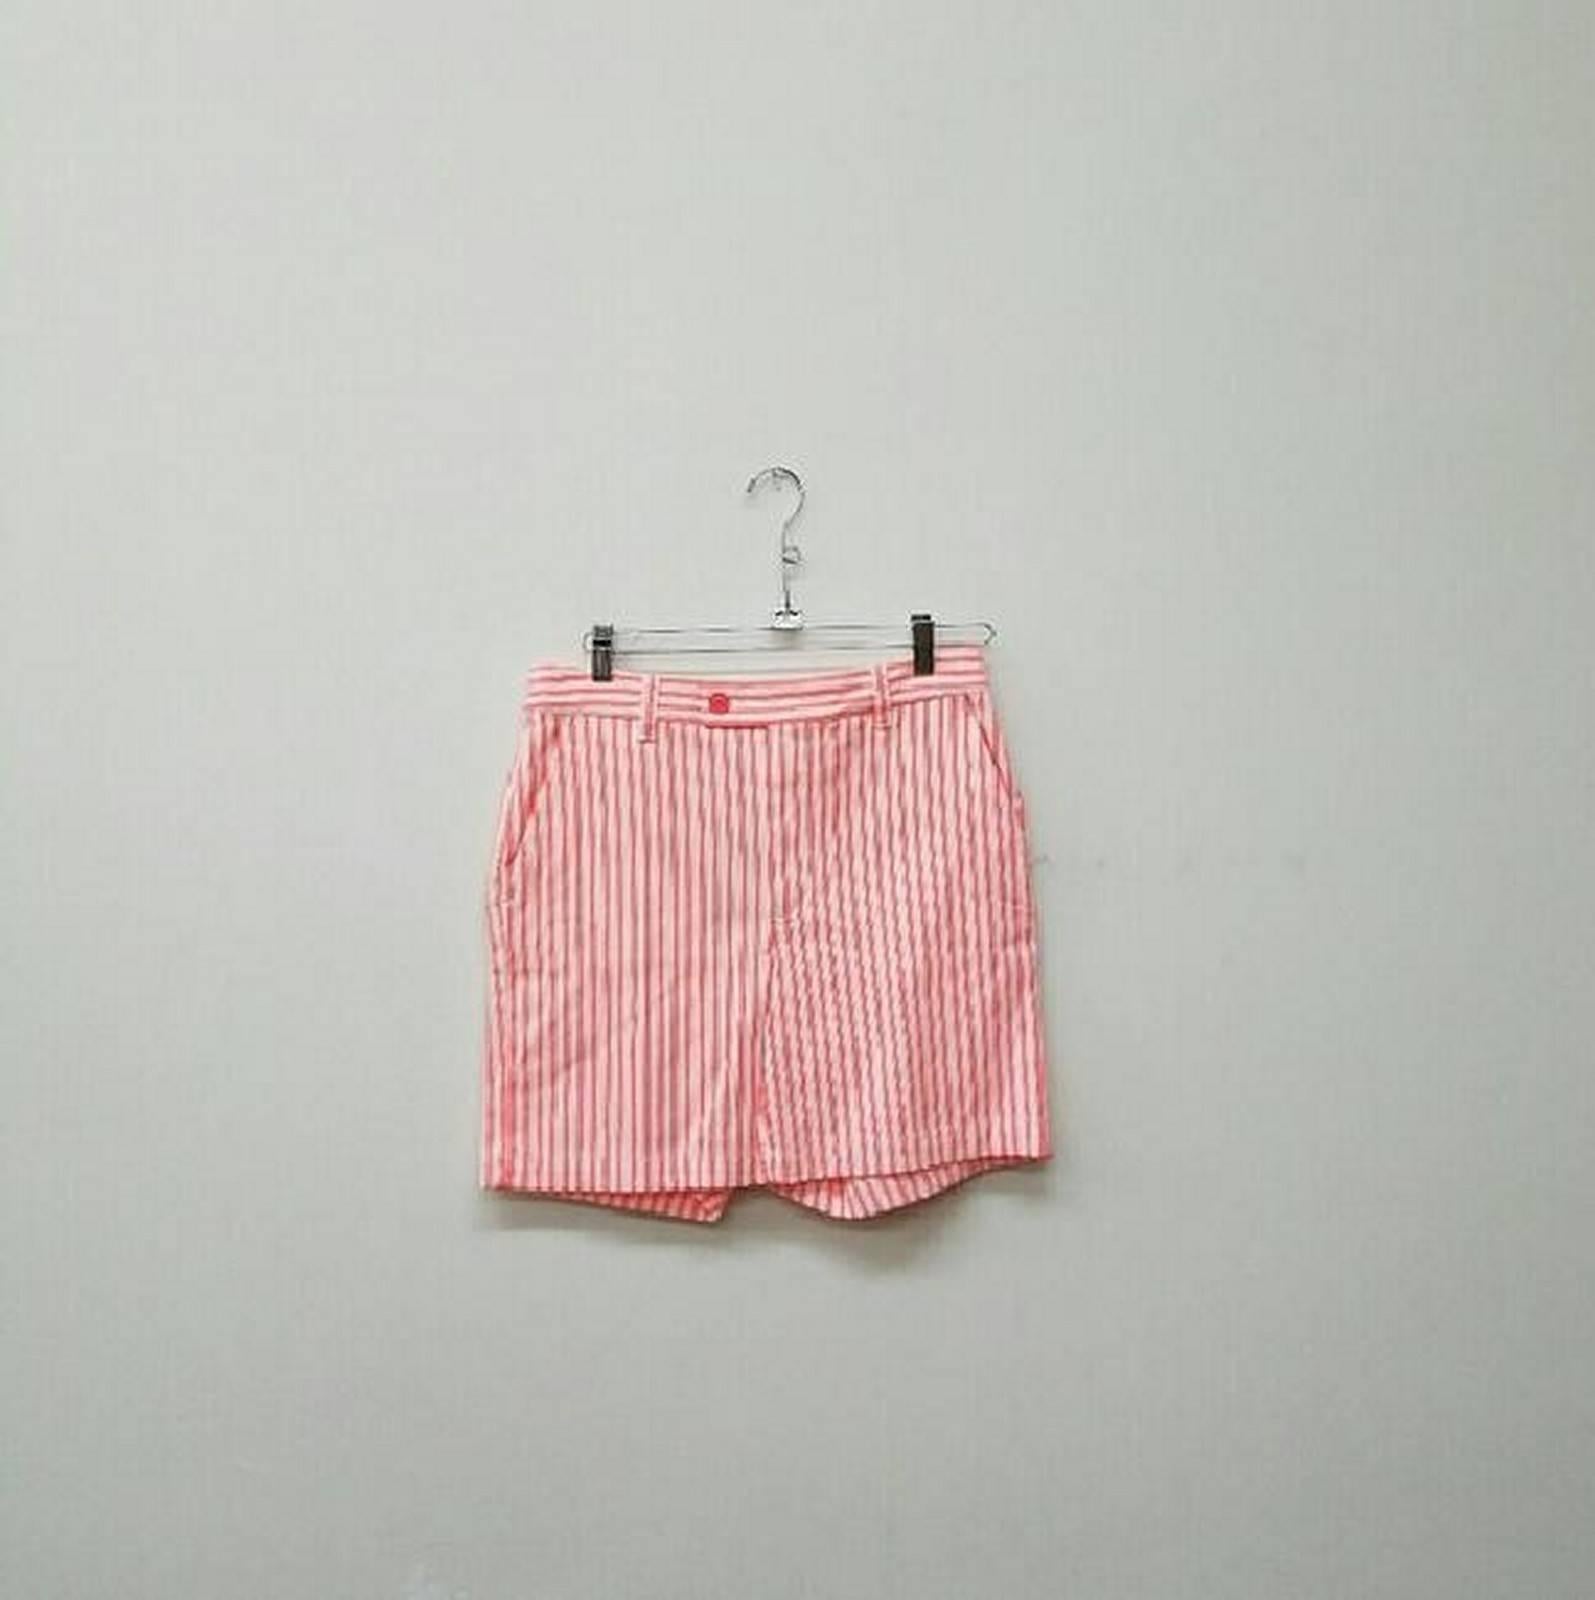 Marc by Marc Jacobs Striped Shorts

Electric Orange and white stripes. Brand new. Never used. Tags still attached.

Type:Shorts
Size:6 (S, 28)
Color:electric orange white
Brand:Marc by Marc Jacobs
Style/Collection:Marc by Marc Jacobs Striped Shorts